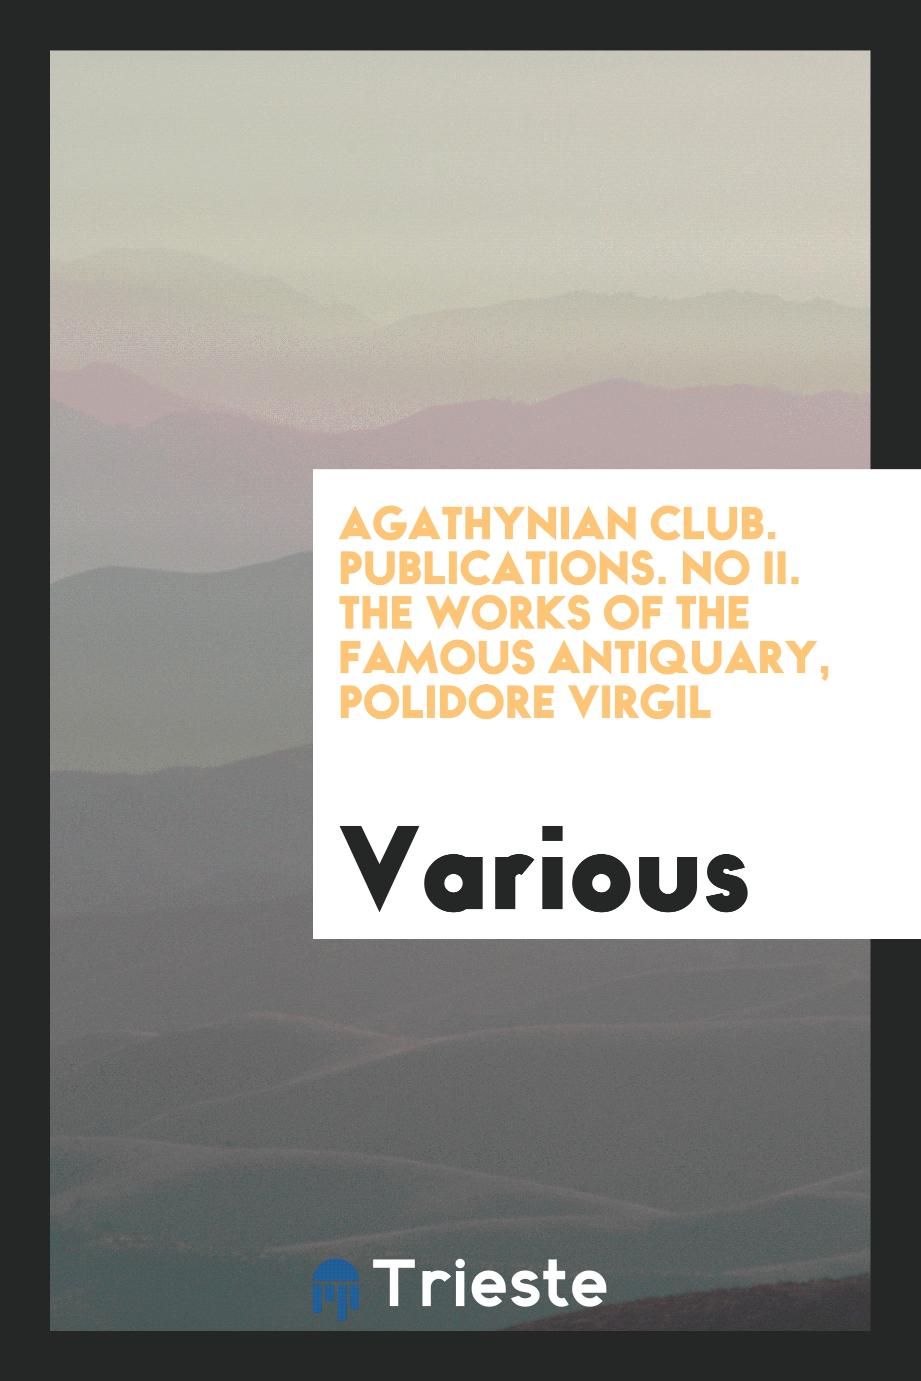 Agathynian Club. Publications. No II. The works of the famous antiquary, polidore Virgil